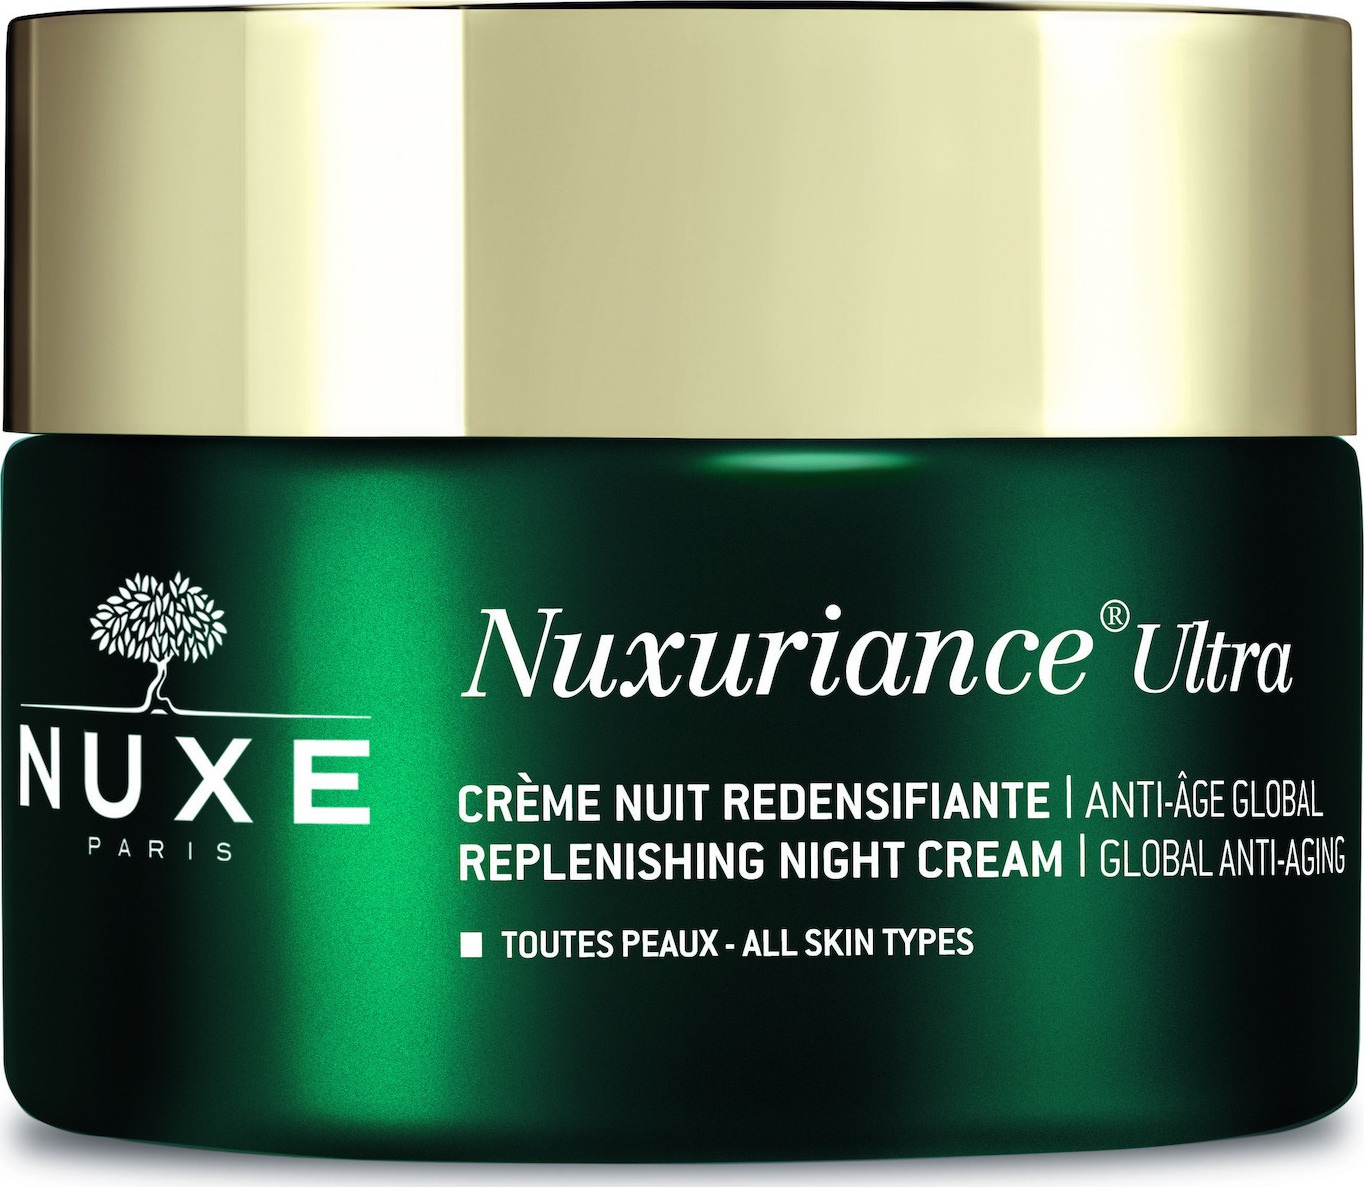 Nuxe Nuxuriance Ultra Crème Nuit